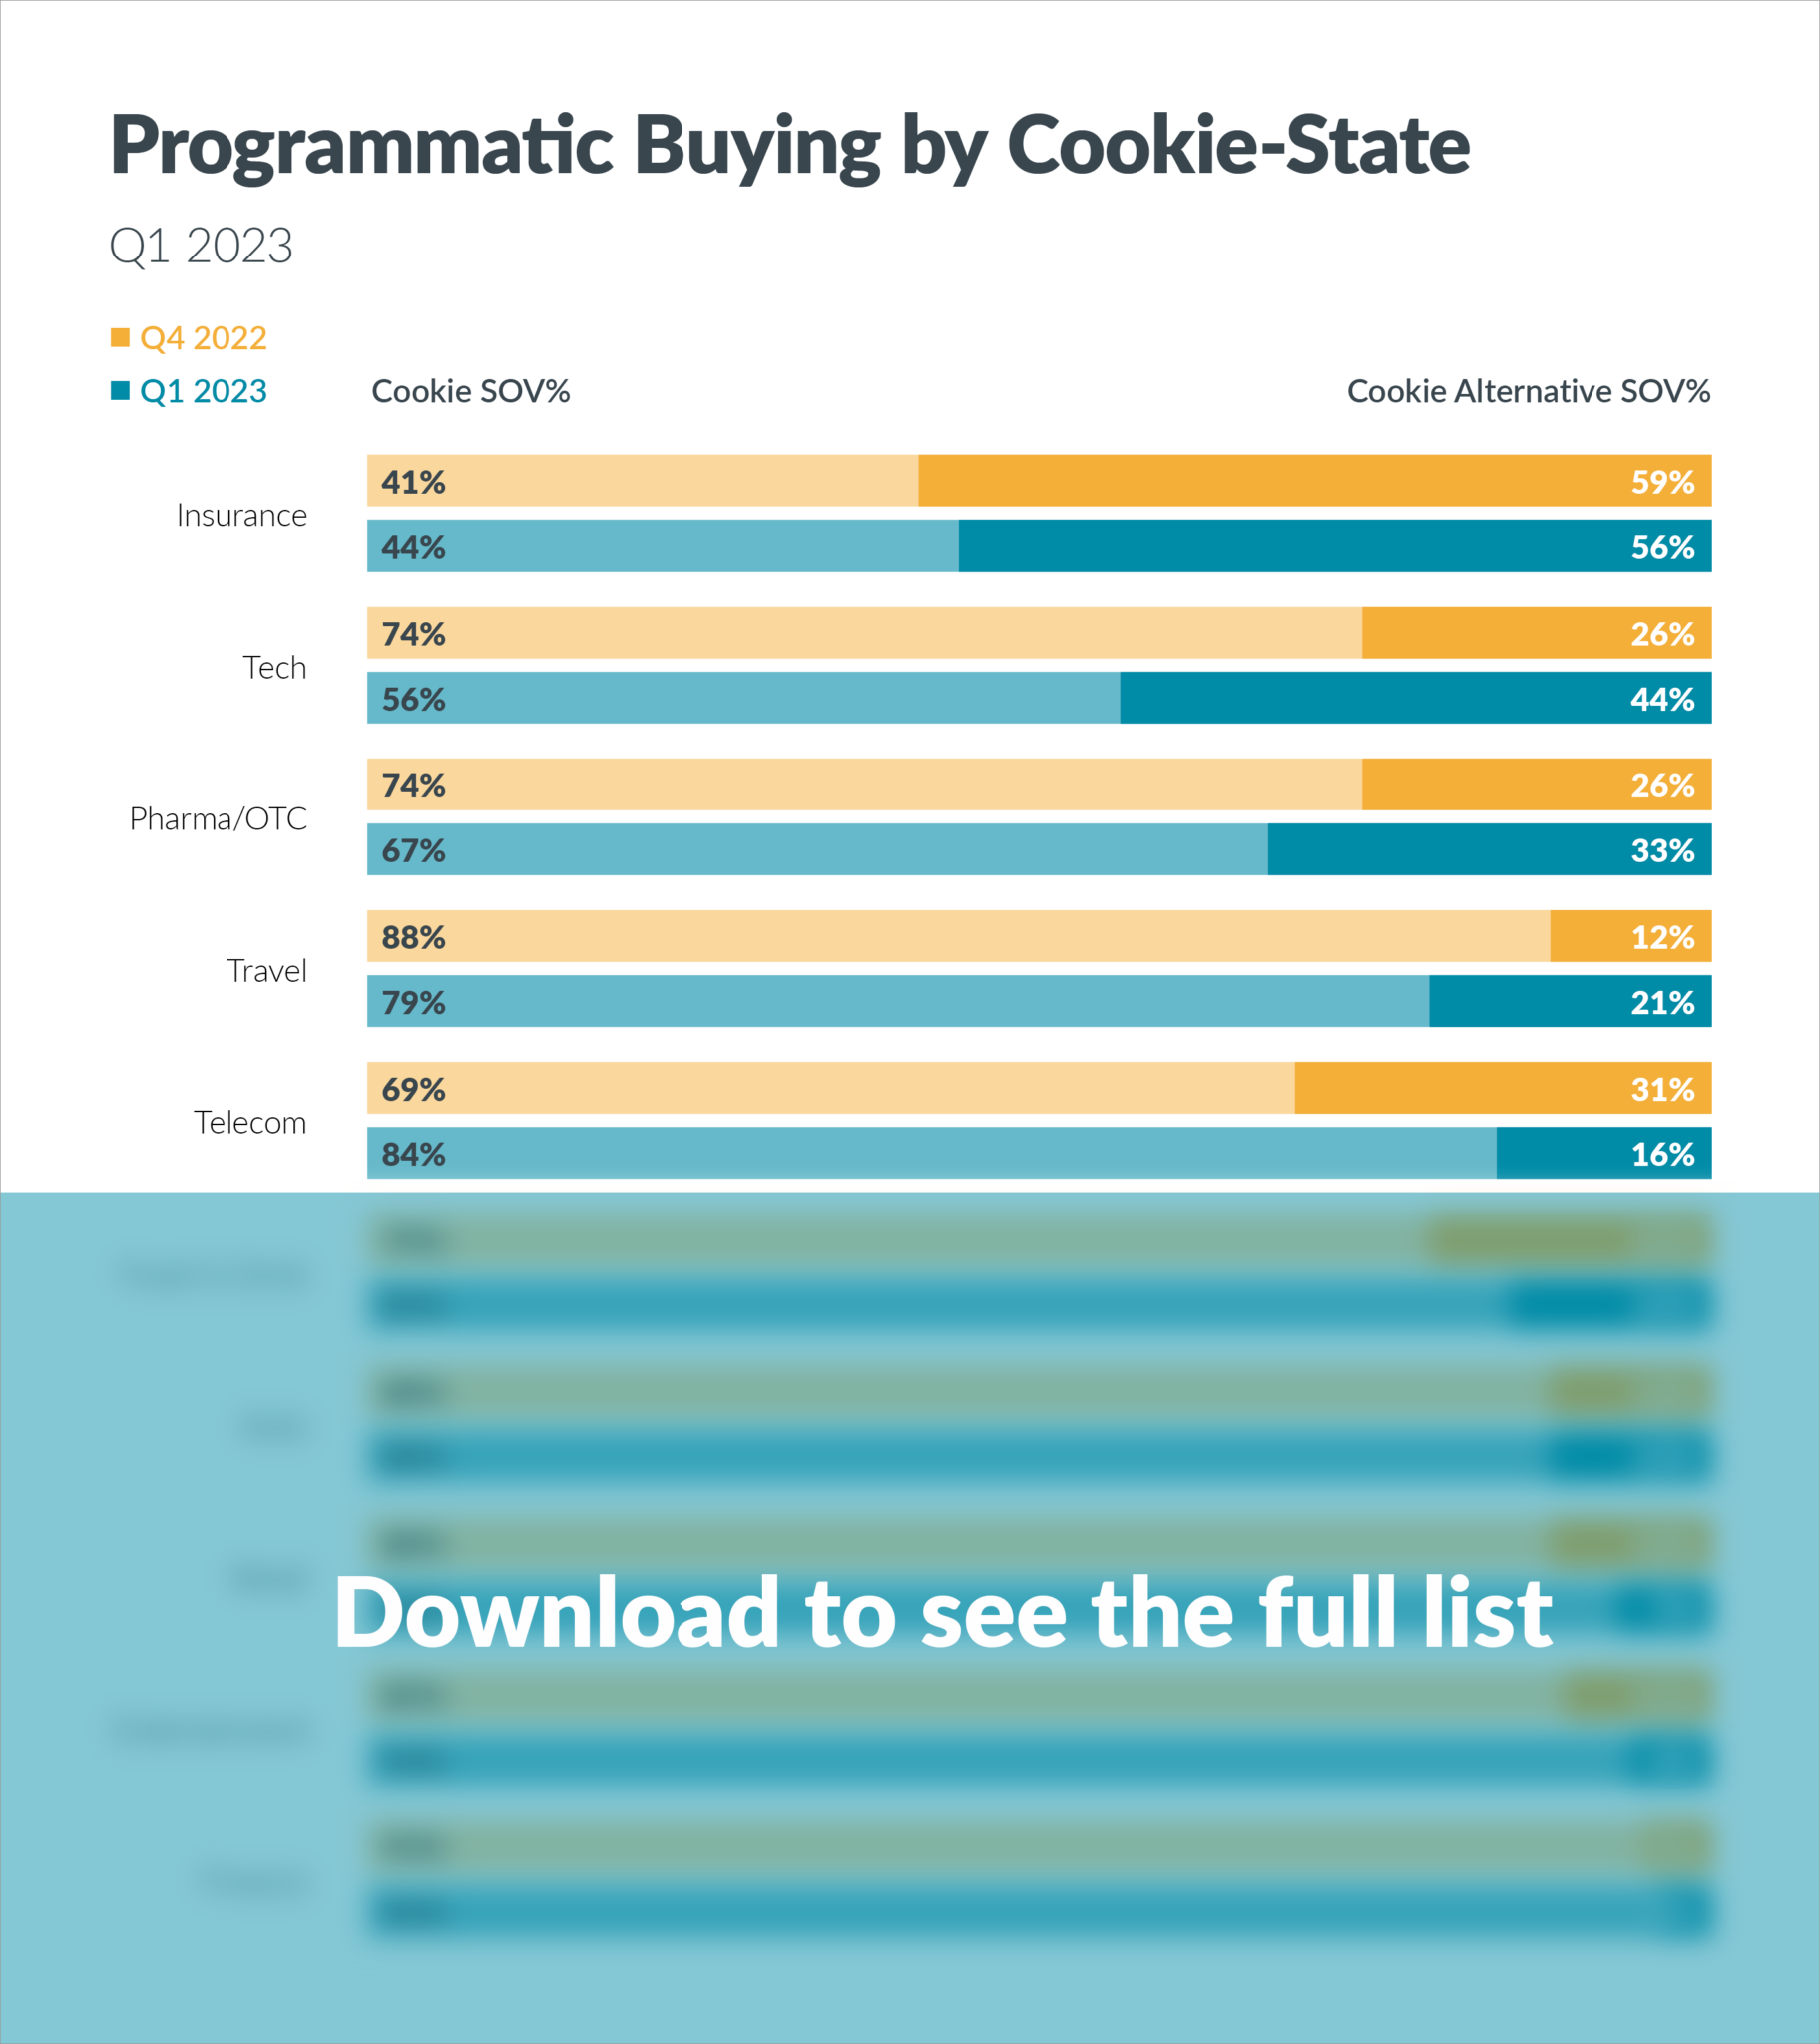 33Across Programmatic Buying by cookie-state chart